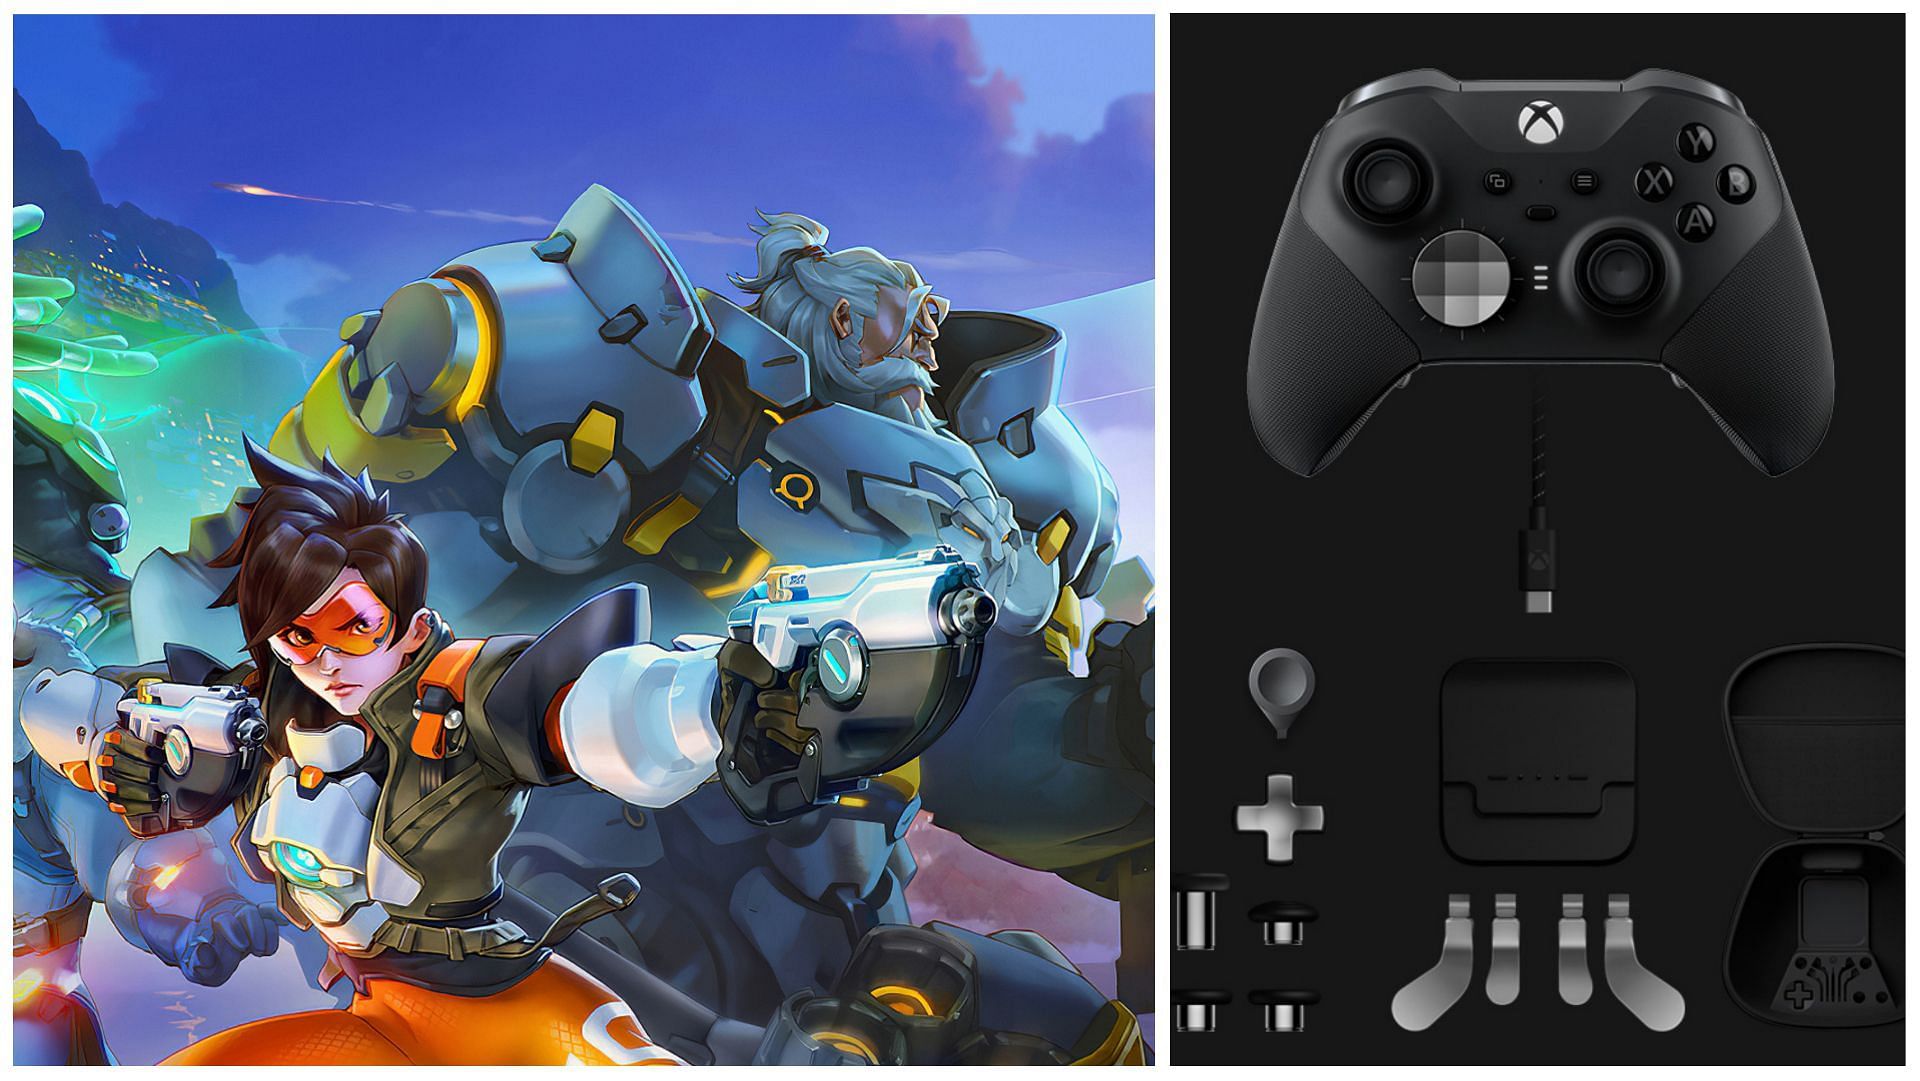 Best Xbox settings for Overwatch 2 to dominate competitive lobbies - sensitivity, aim assist, keybinds and other key adjustments (Image via overwatch.blizzard.com and xbox.com)